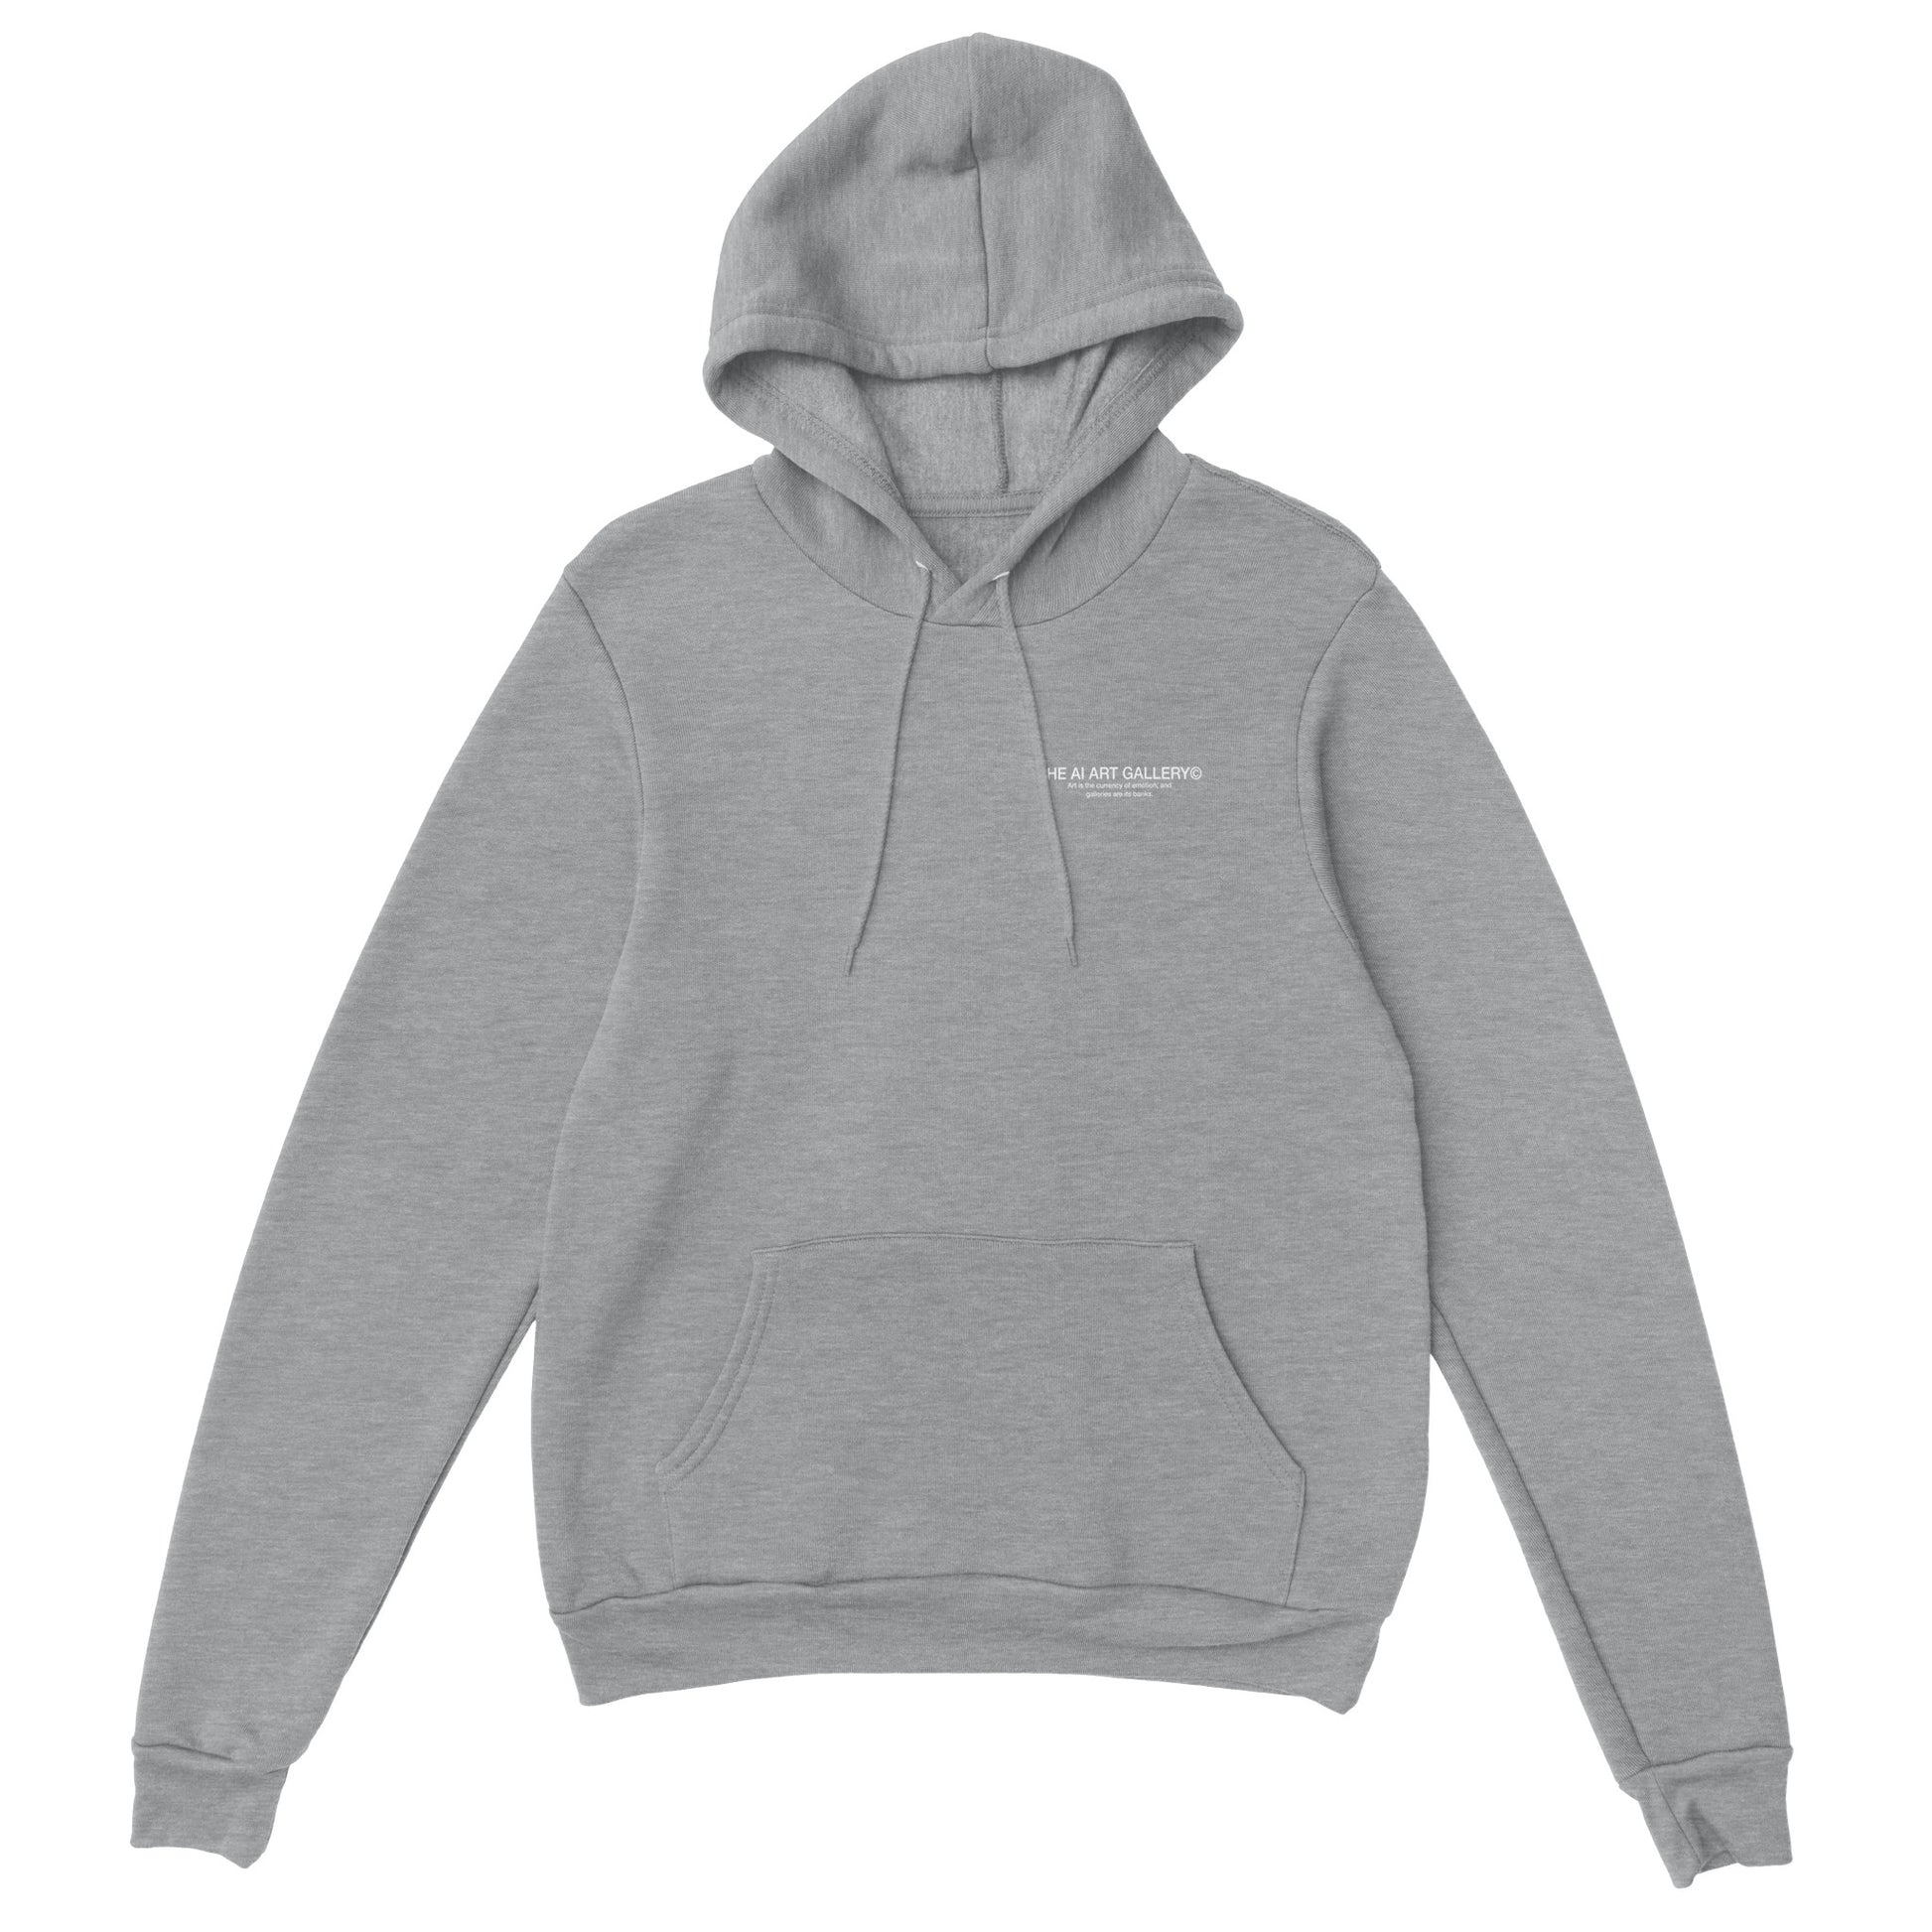 FUMIGANS FRATRIBUS / Hoodie / sports grey – THE AI ART GALLERY